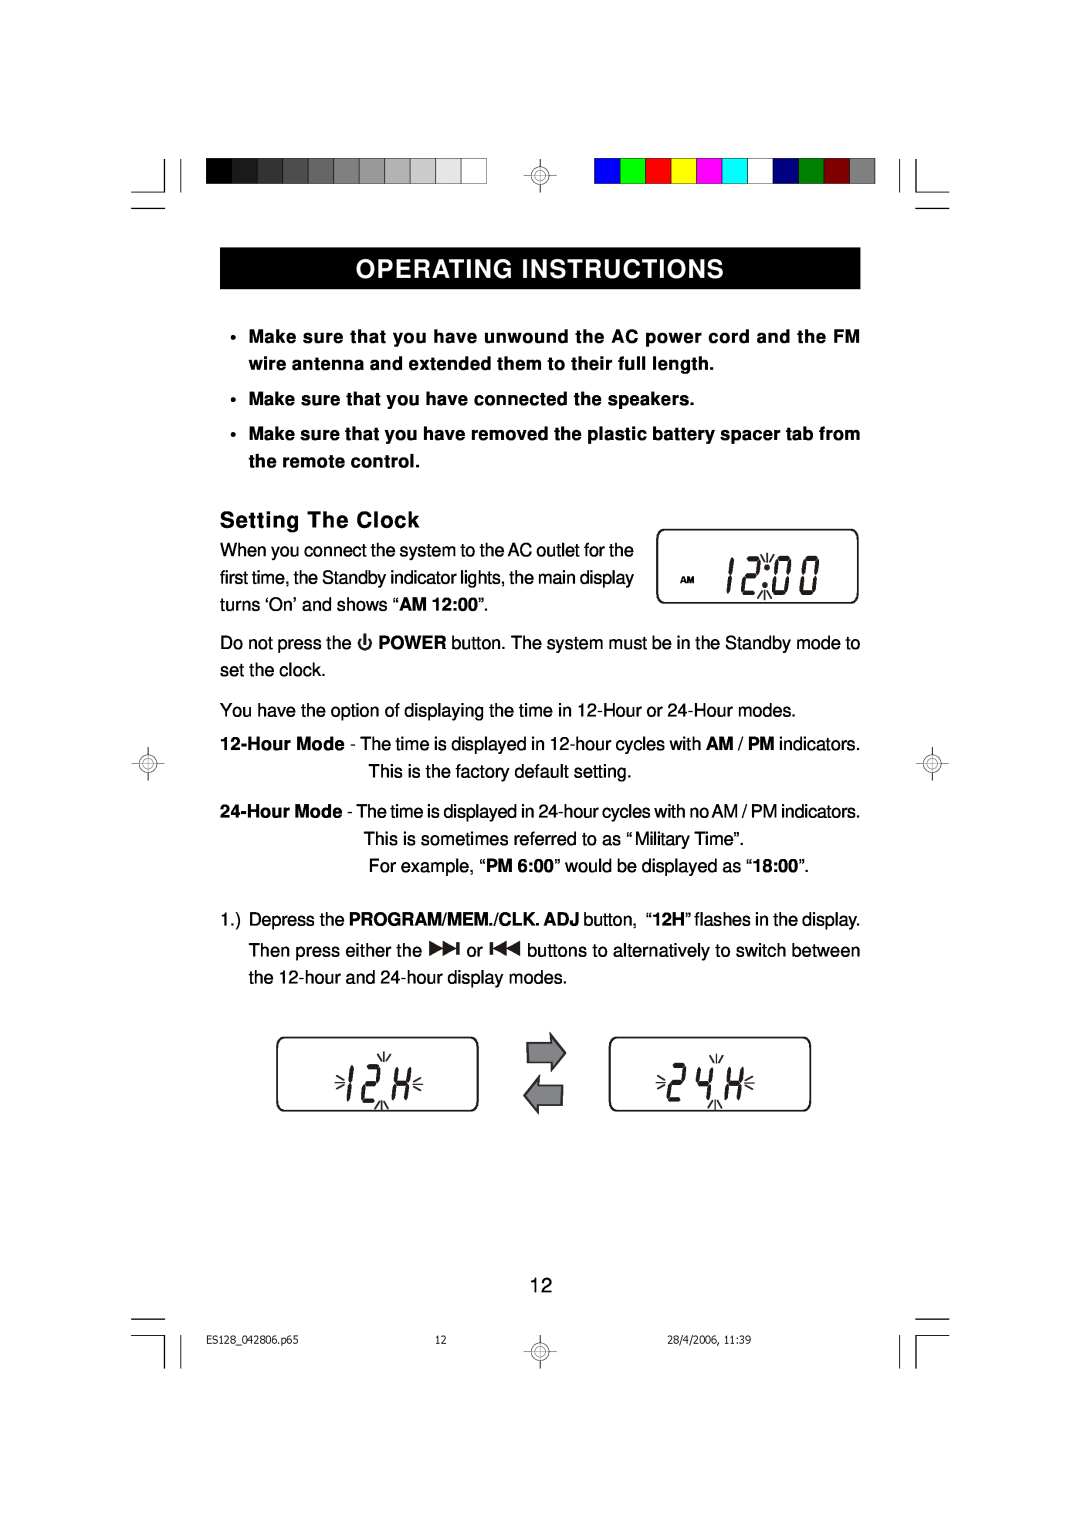 Emerson ES128 owner manual Operating Instructions, Setting The Clock 